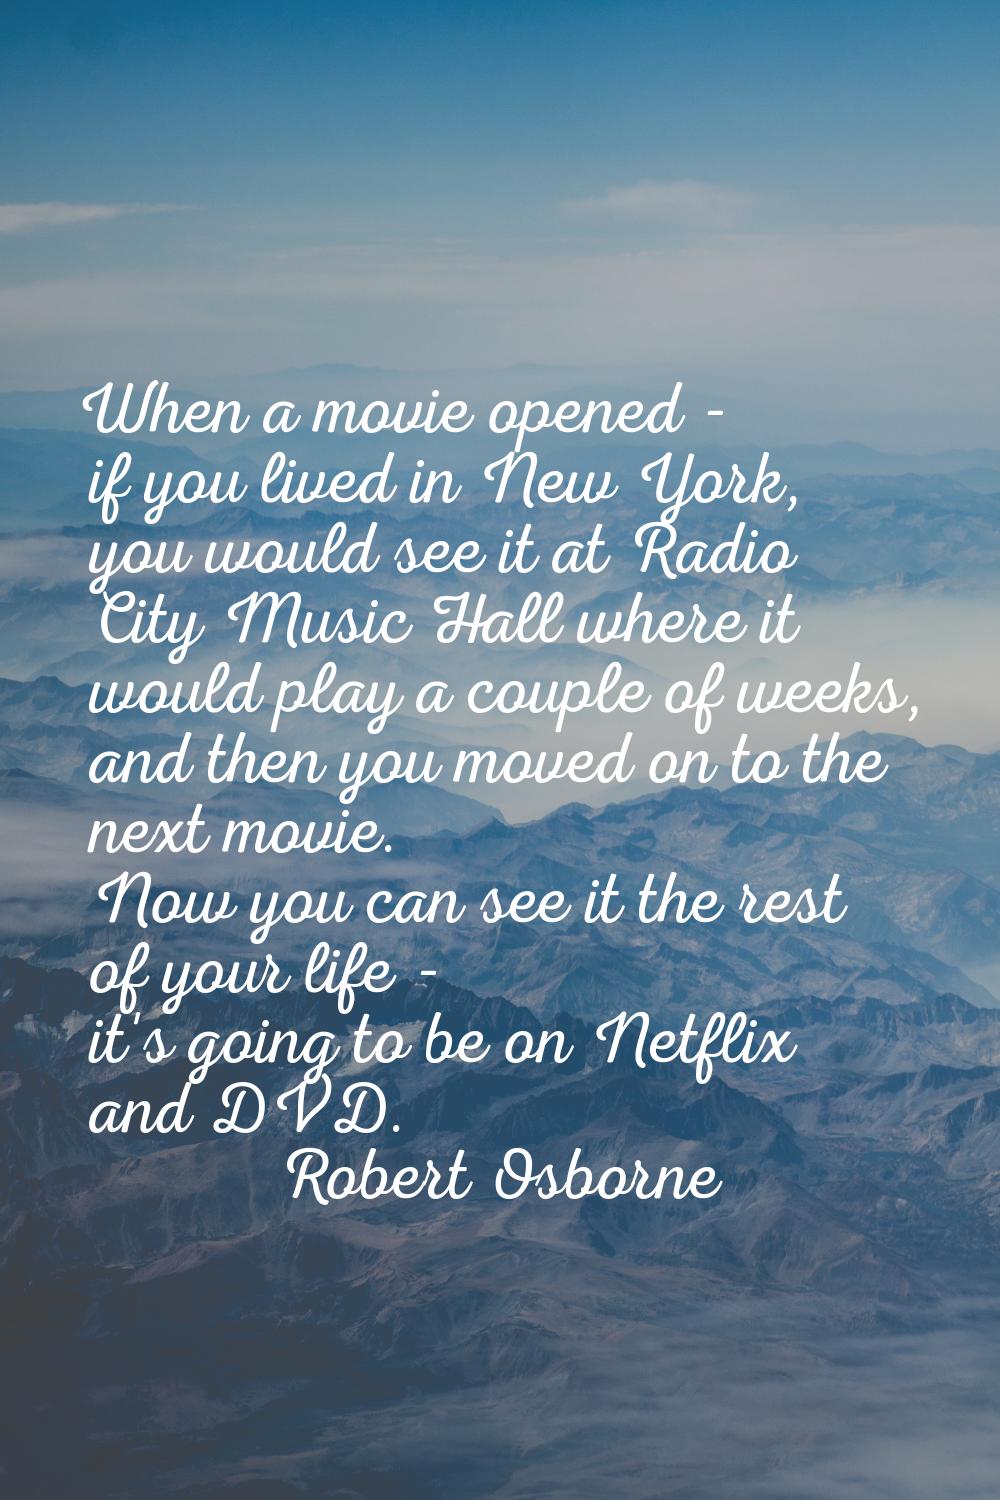 When a movie opened - if you lived in New York, you would see it at Radio City Music Hall where it 